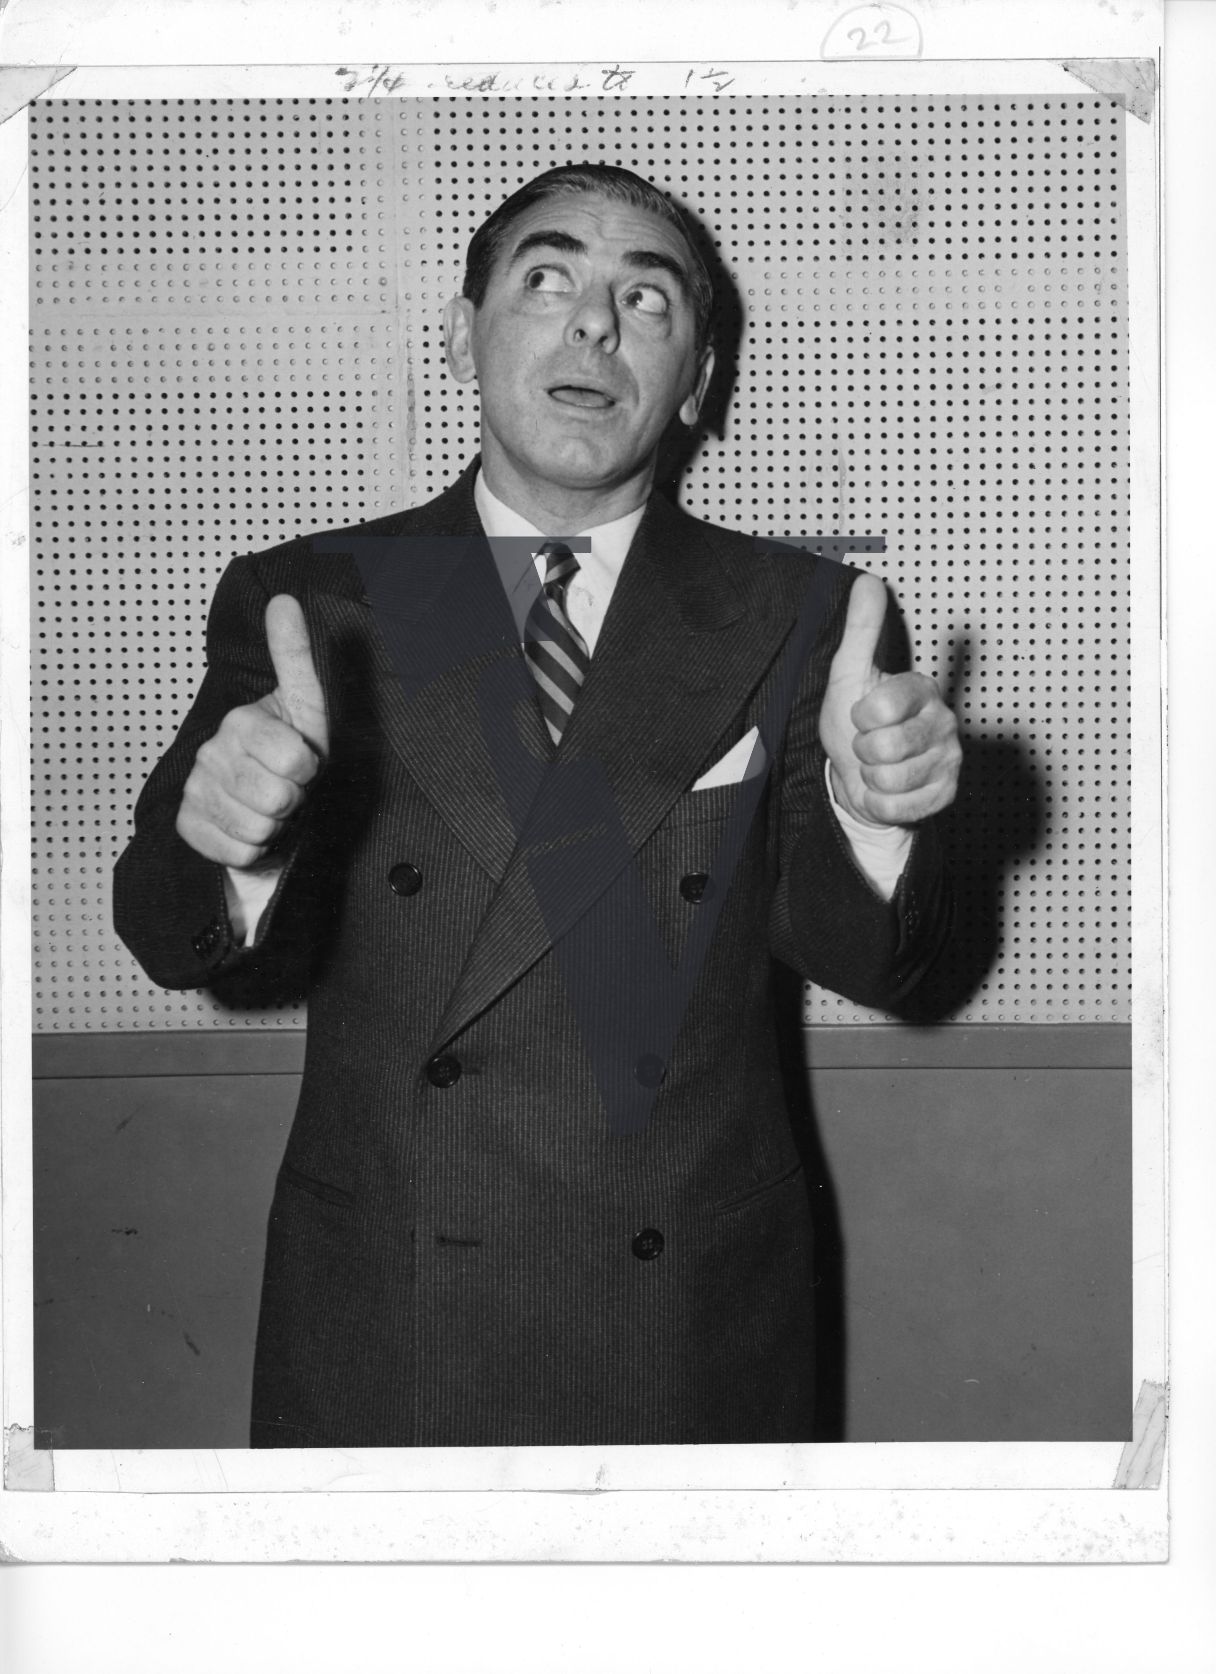 Eddie Cantor, actor, comedian, thumbs-up, portrait, mid-shot.